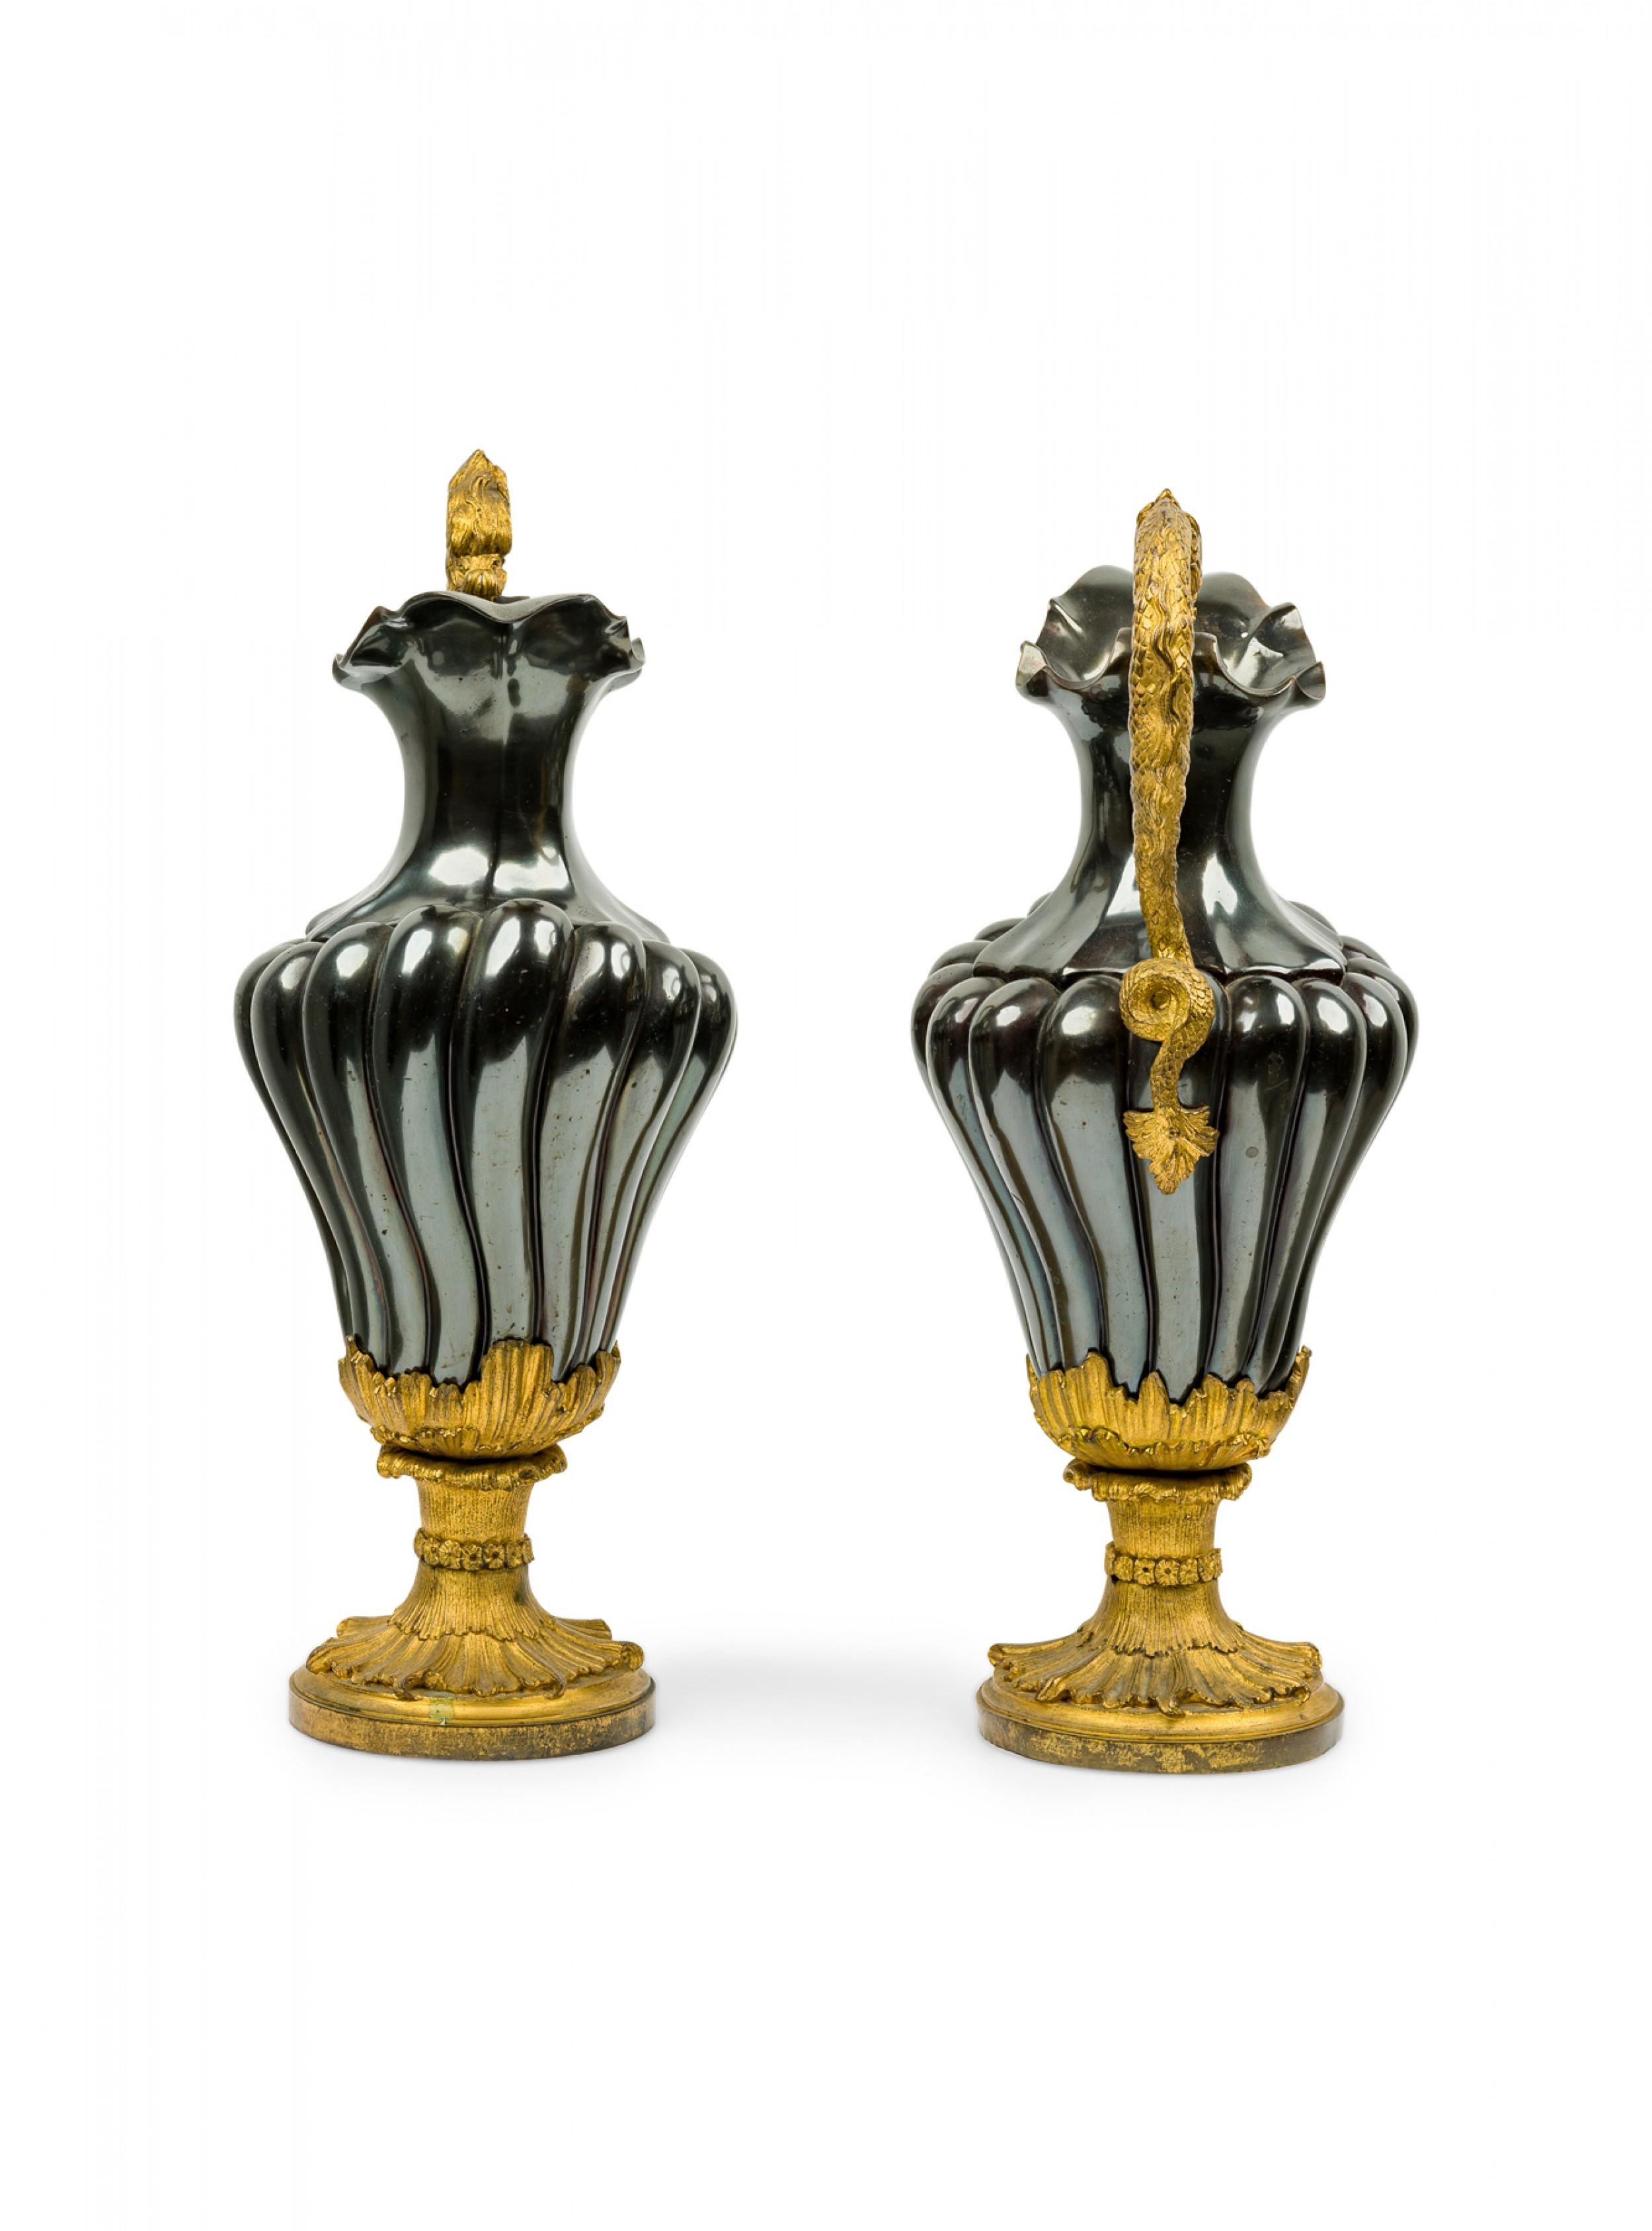 Pair of French Victorian urns / ewers with metallic black enameled fluted bodies and elaborate gilt bronze serpent handles resting on ormolu foliate detailed circular base.